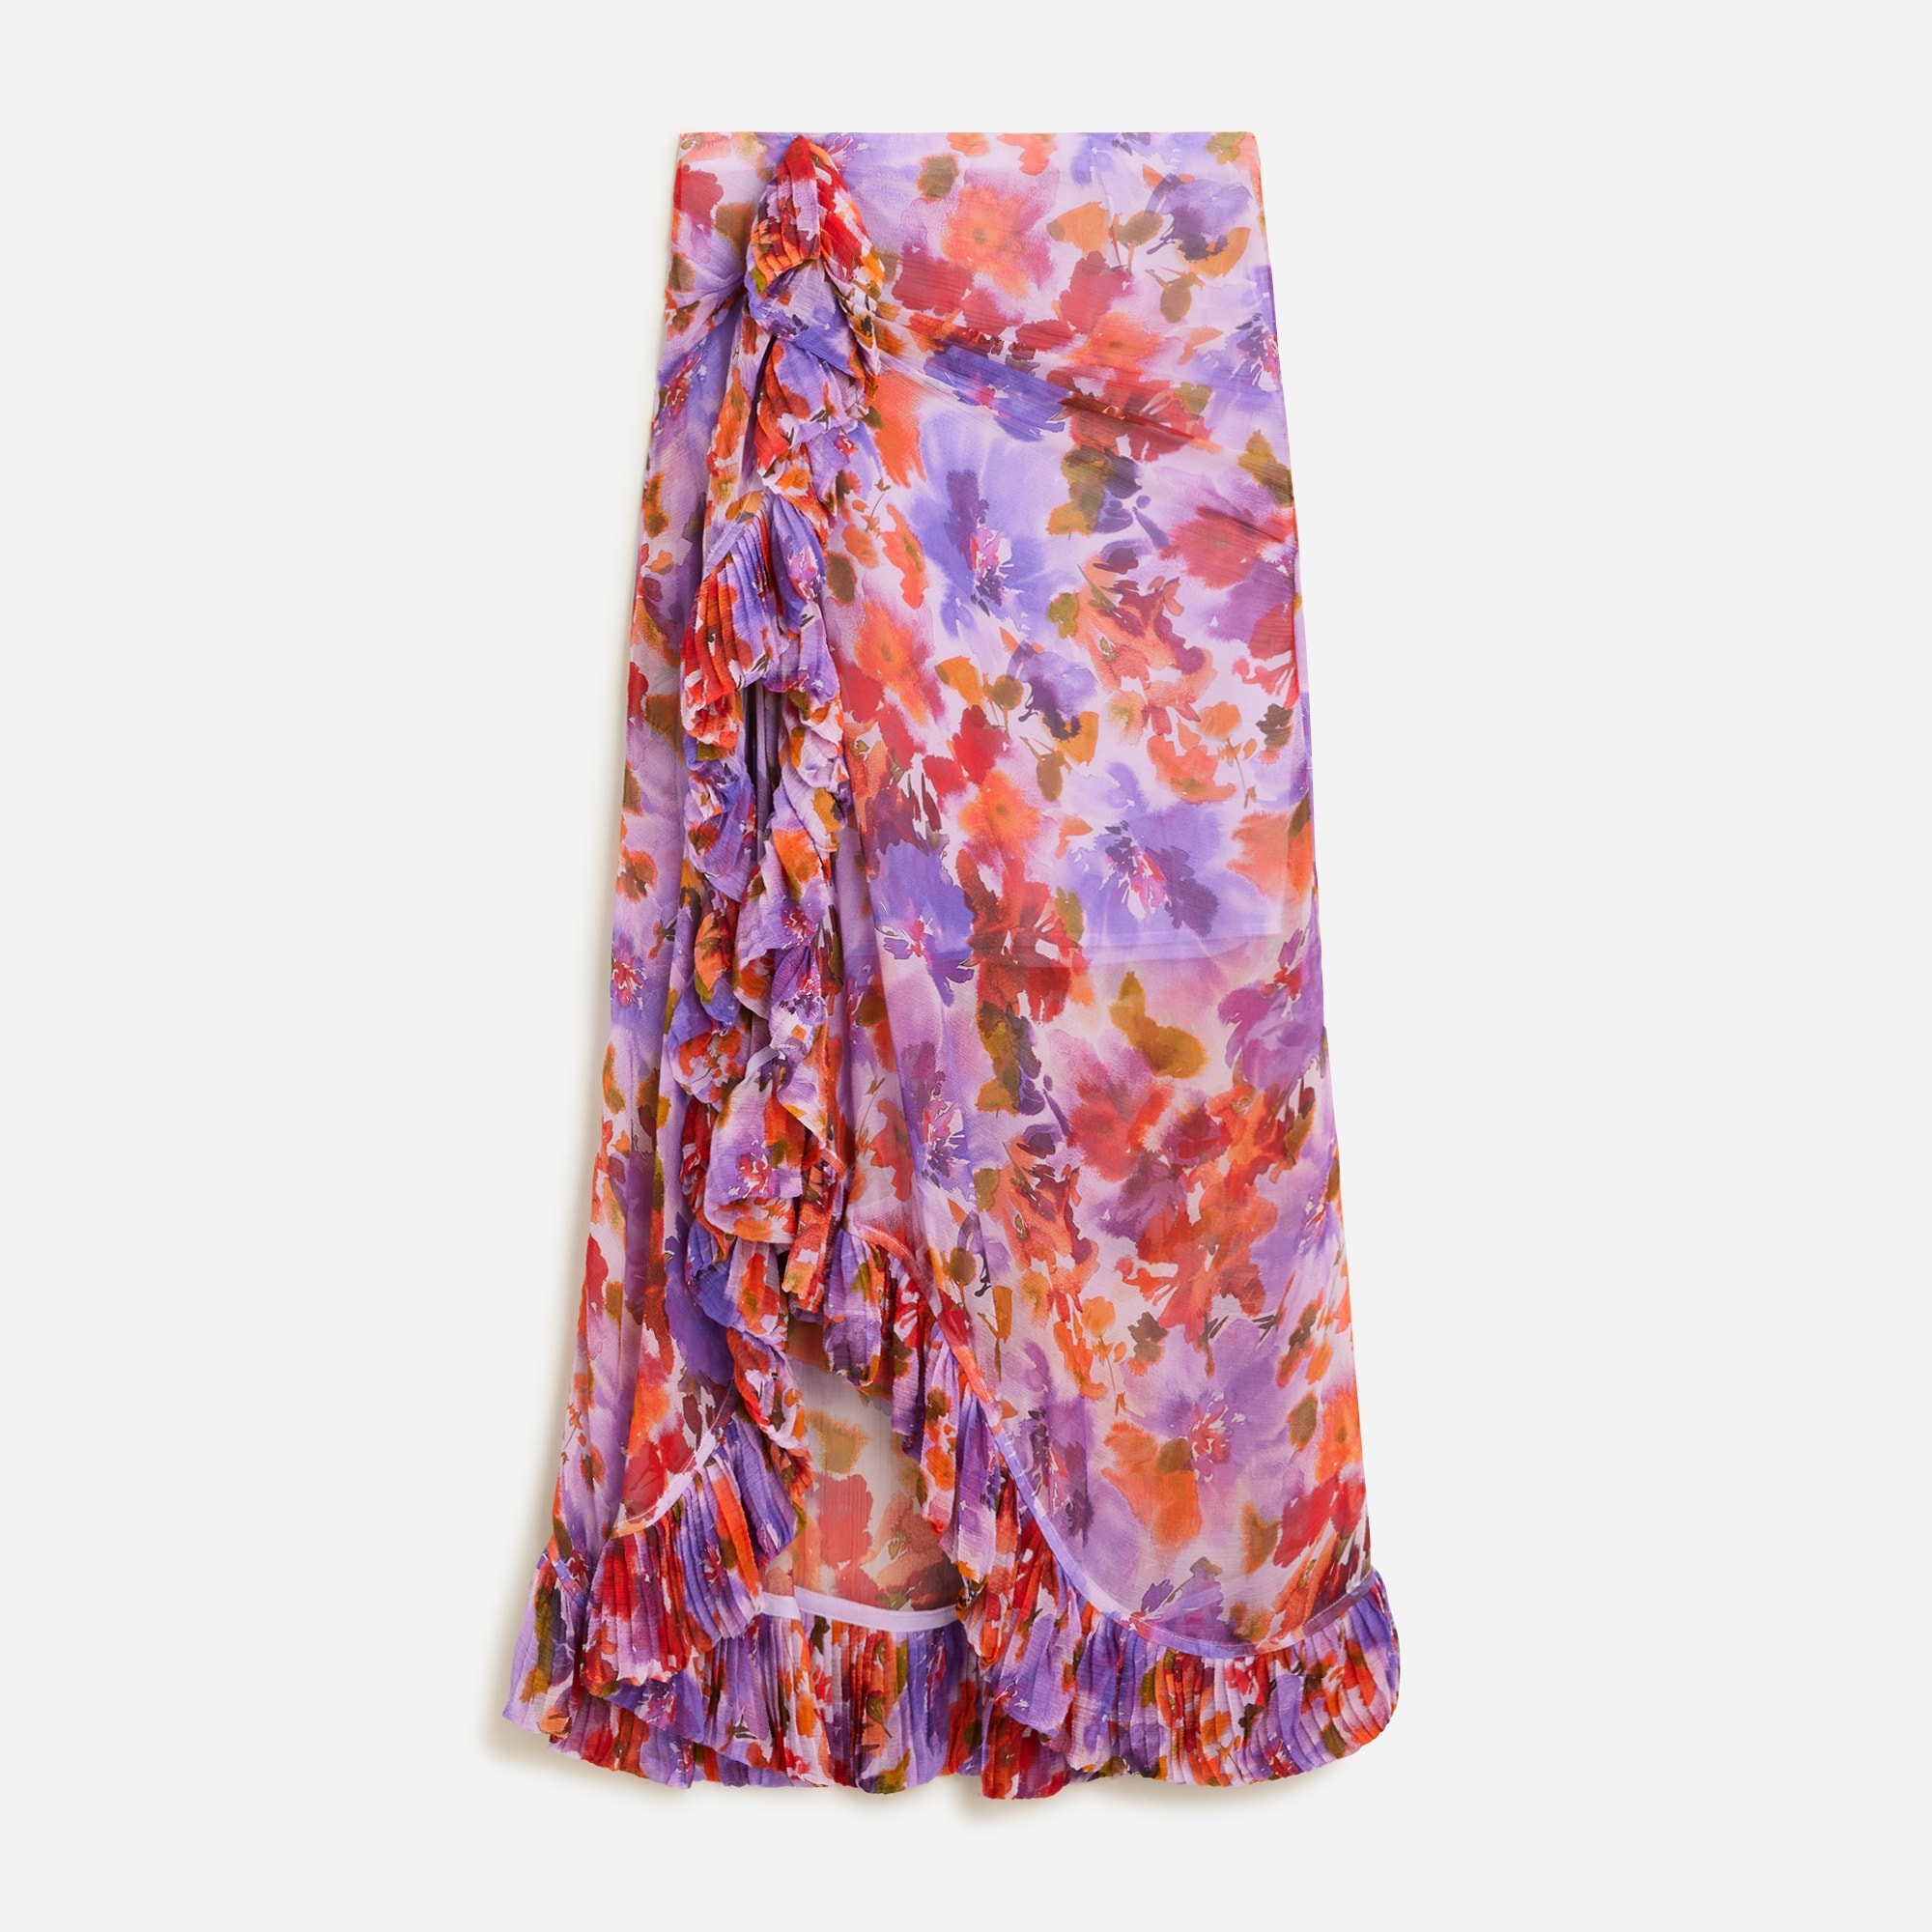  Collection chiffon ruffle skirt in floral